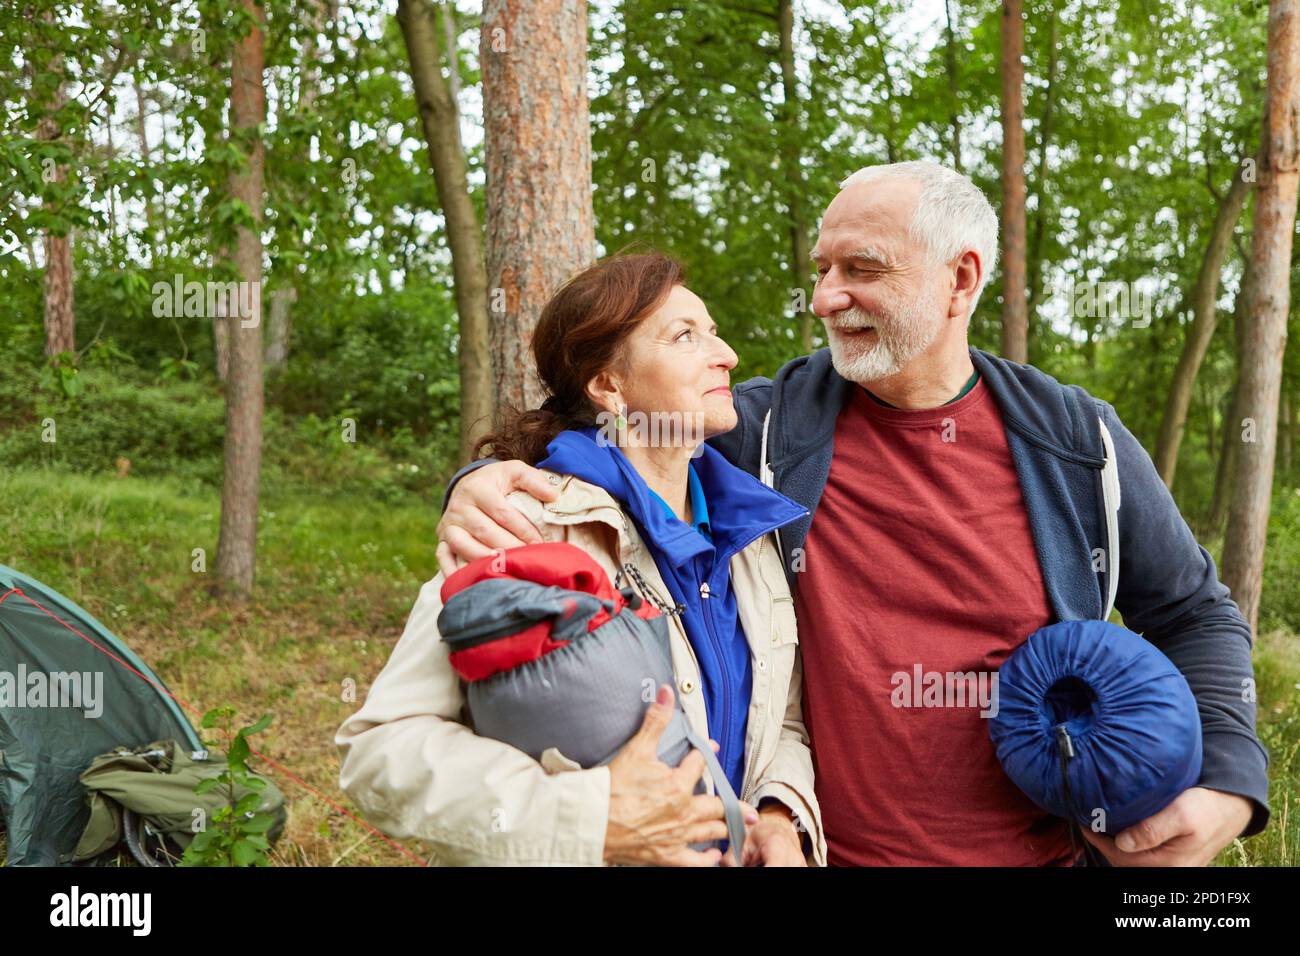 Smiling senior man with arm around woman holding tent in forest during vacation Stock Photo